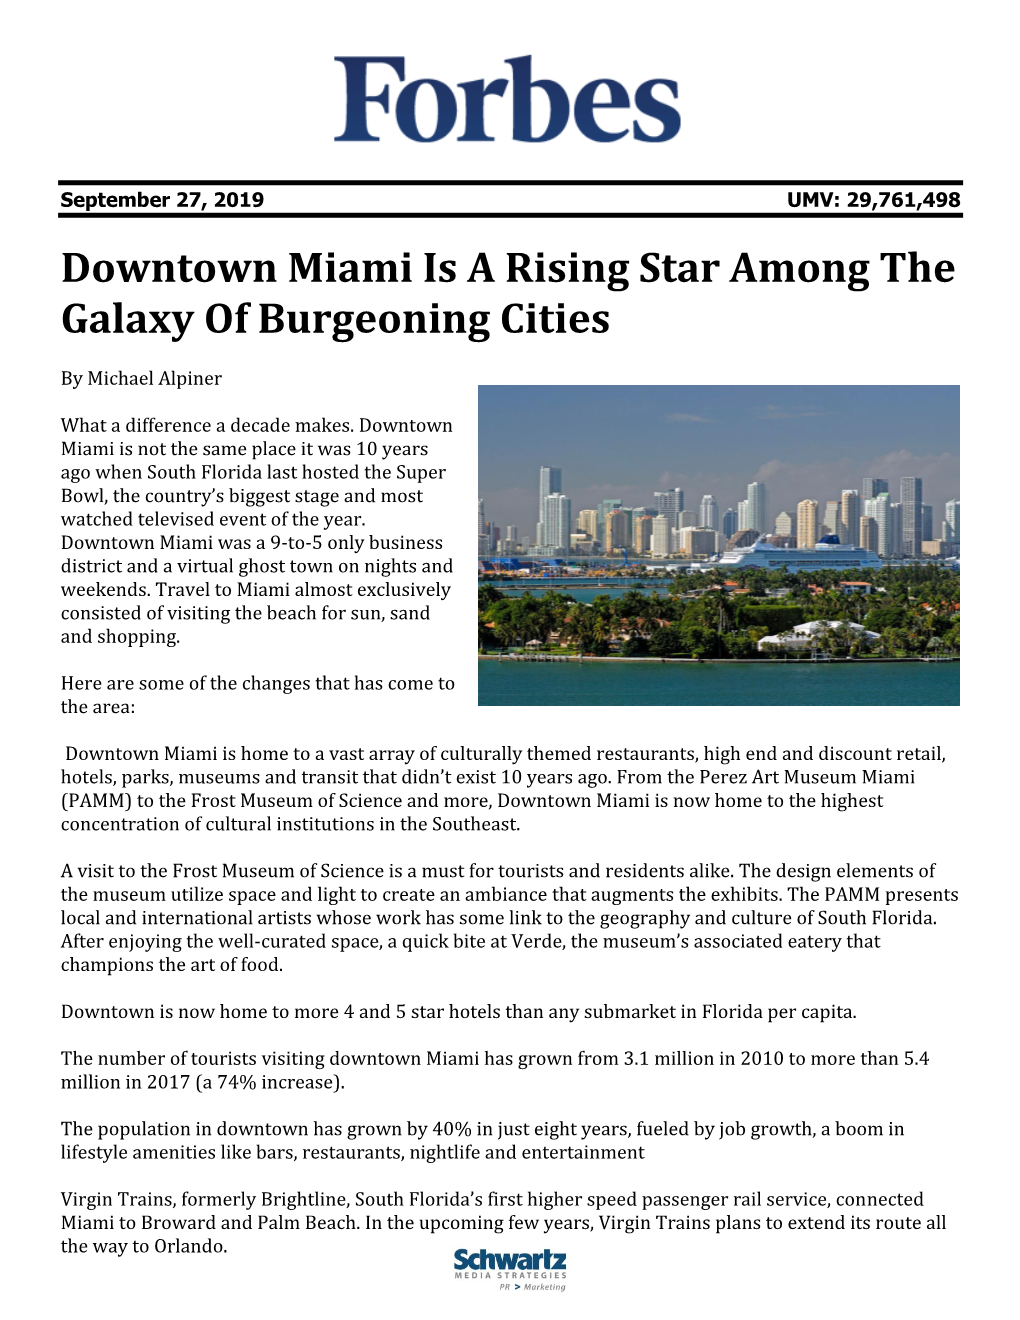 Downtown Miami Is a Rising Star Among the Galaxy of Burgeoning Cities